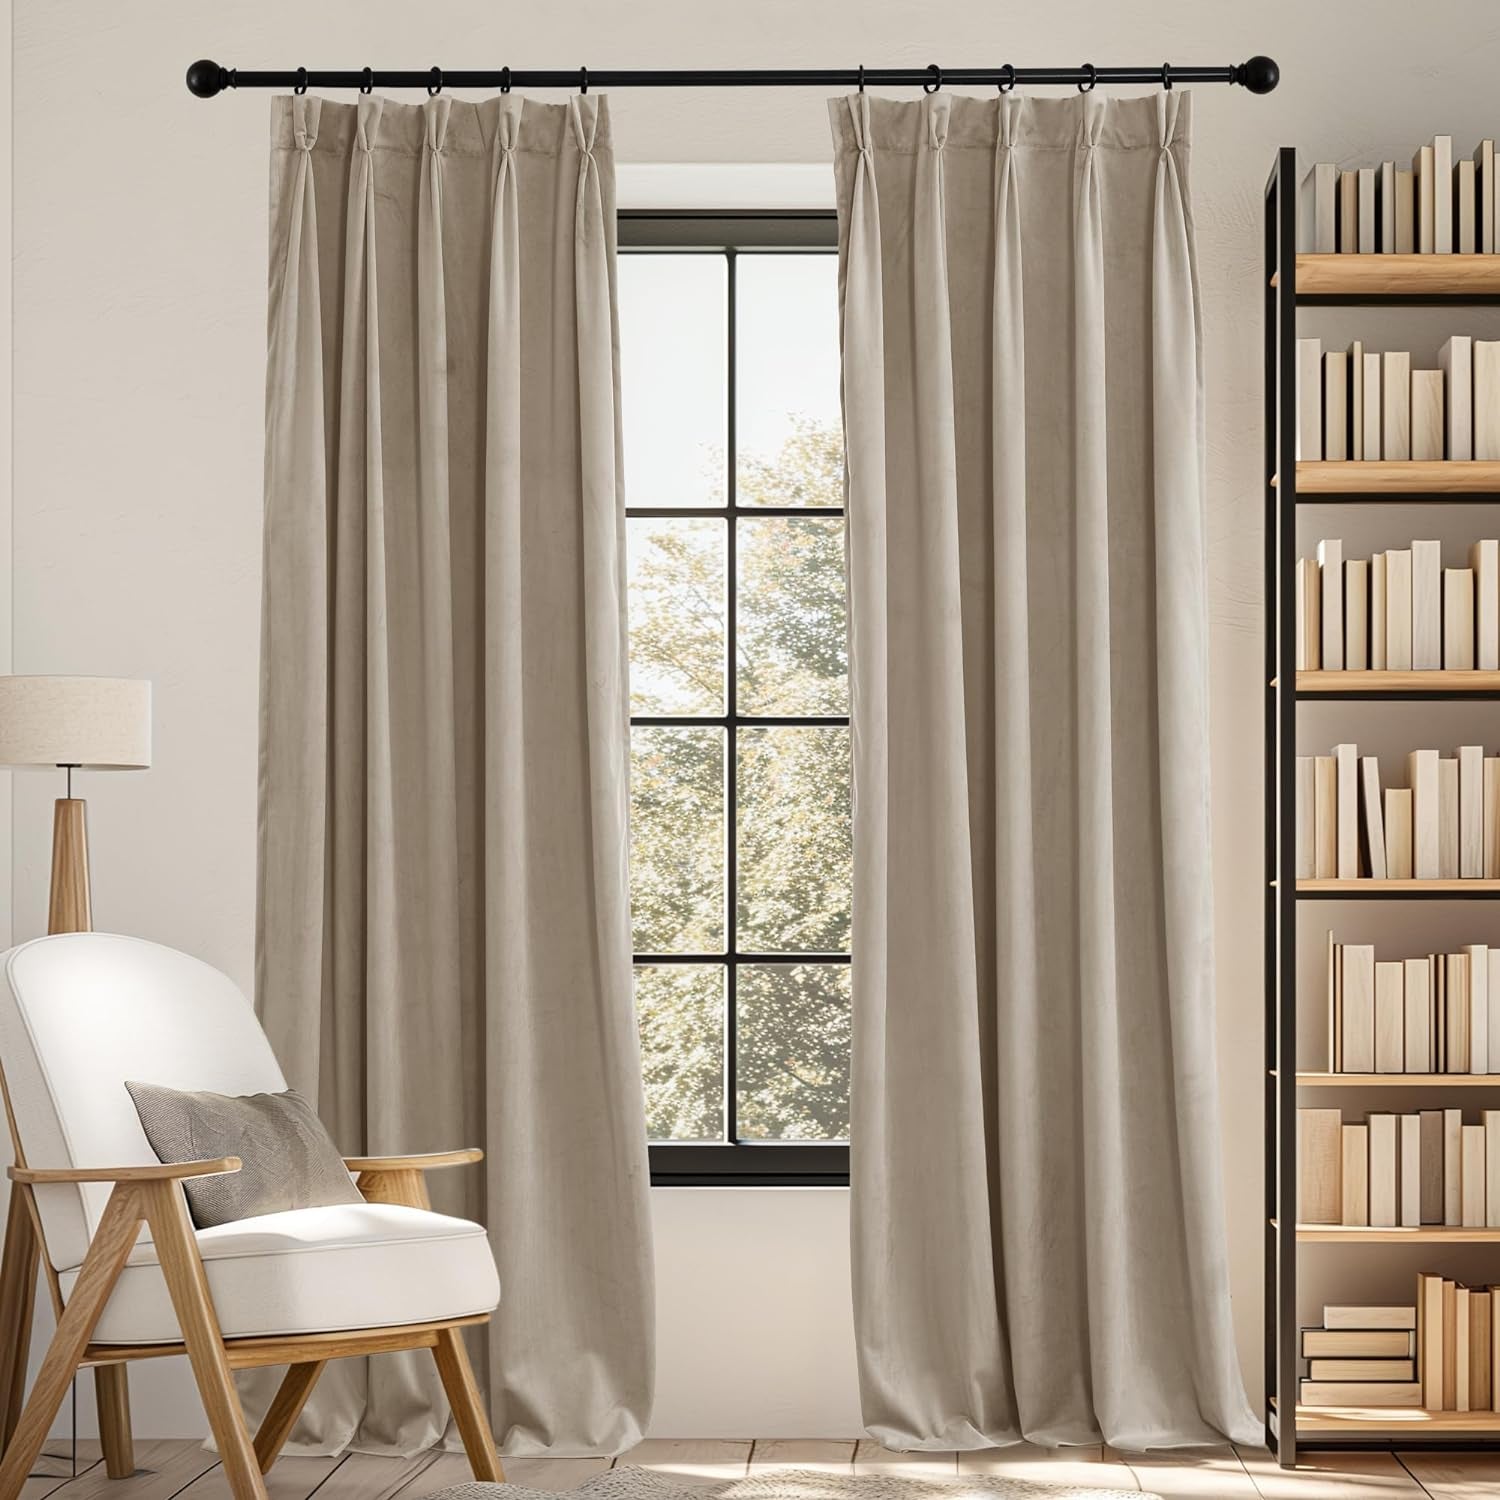 RYB HOME Velvet Curtains 84 Inches 2 Panels Set, Pinch Pleated Room Darkening Thermal Insulated Luxury Decor for Bedroom Parlor Nursery, Camel Beige, W34 X L84 Inches  RYB HOME   